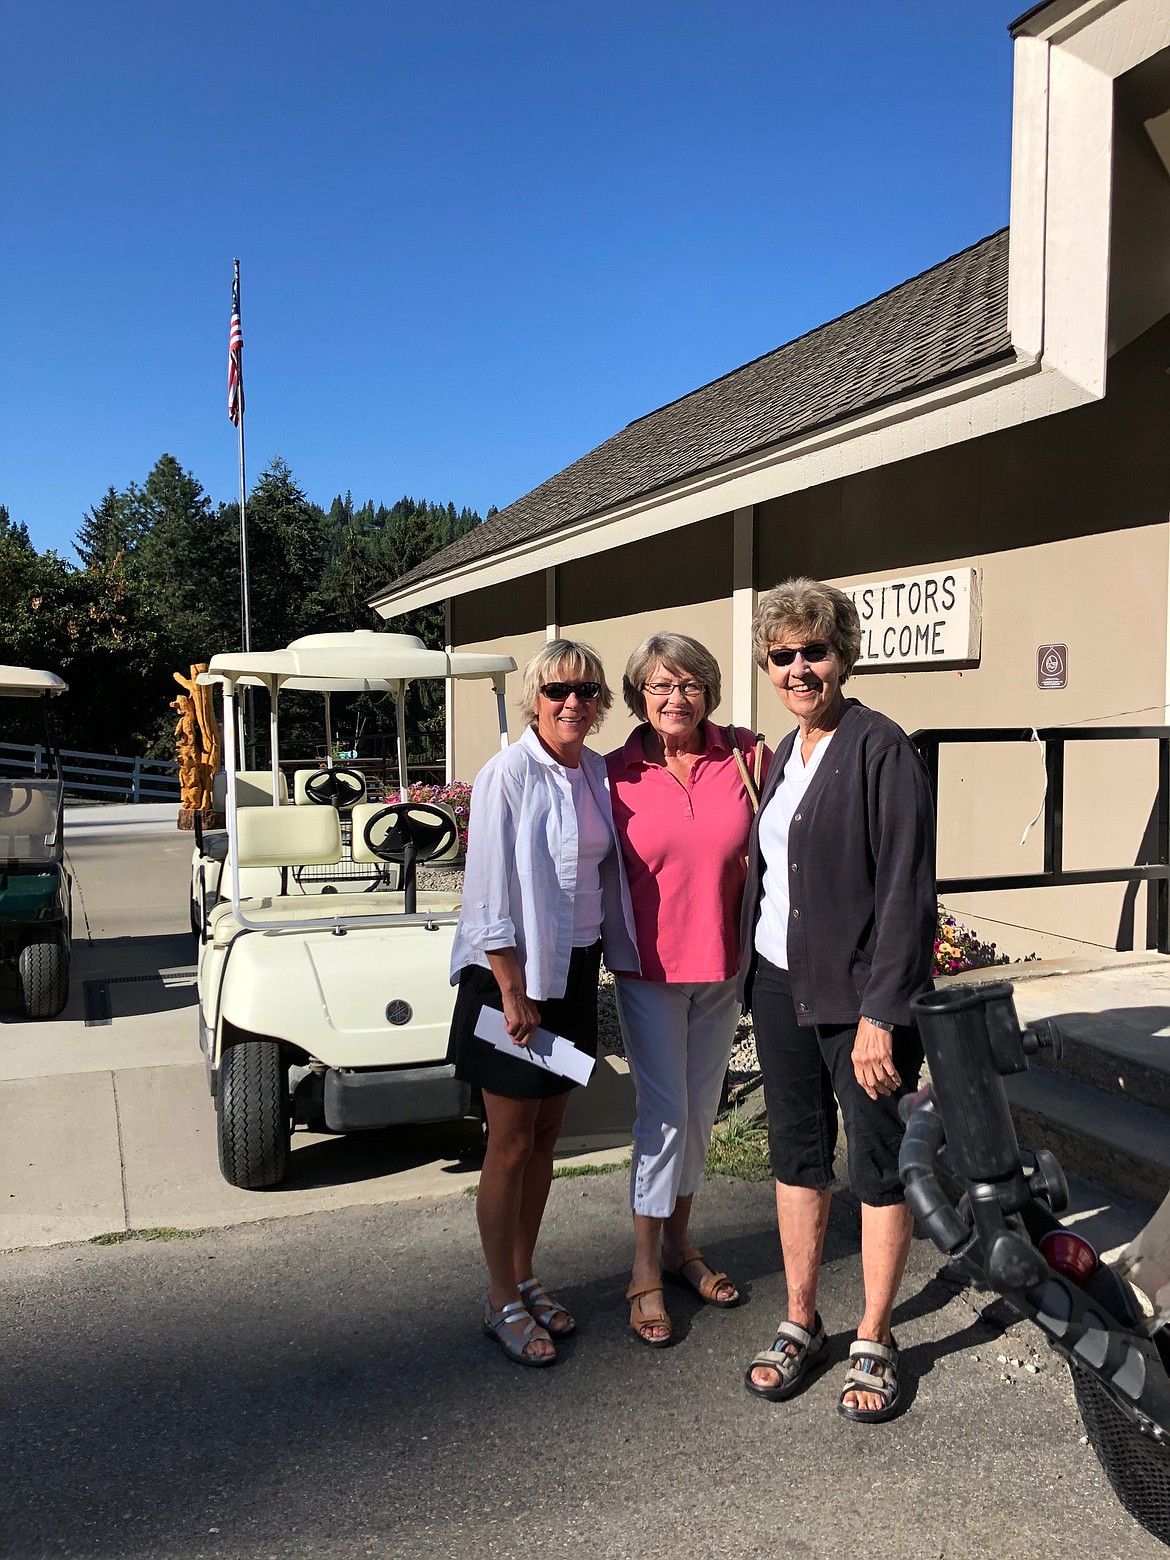 Mirror lake Ladies Golf president Carrie Figgins with Elaine Morgan and Evelyn Rae on their way to the first hole on Ladies’ Day.